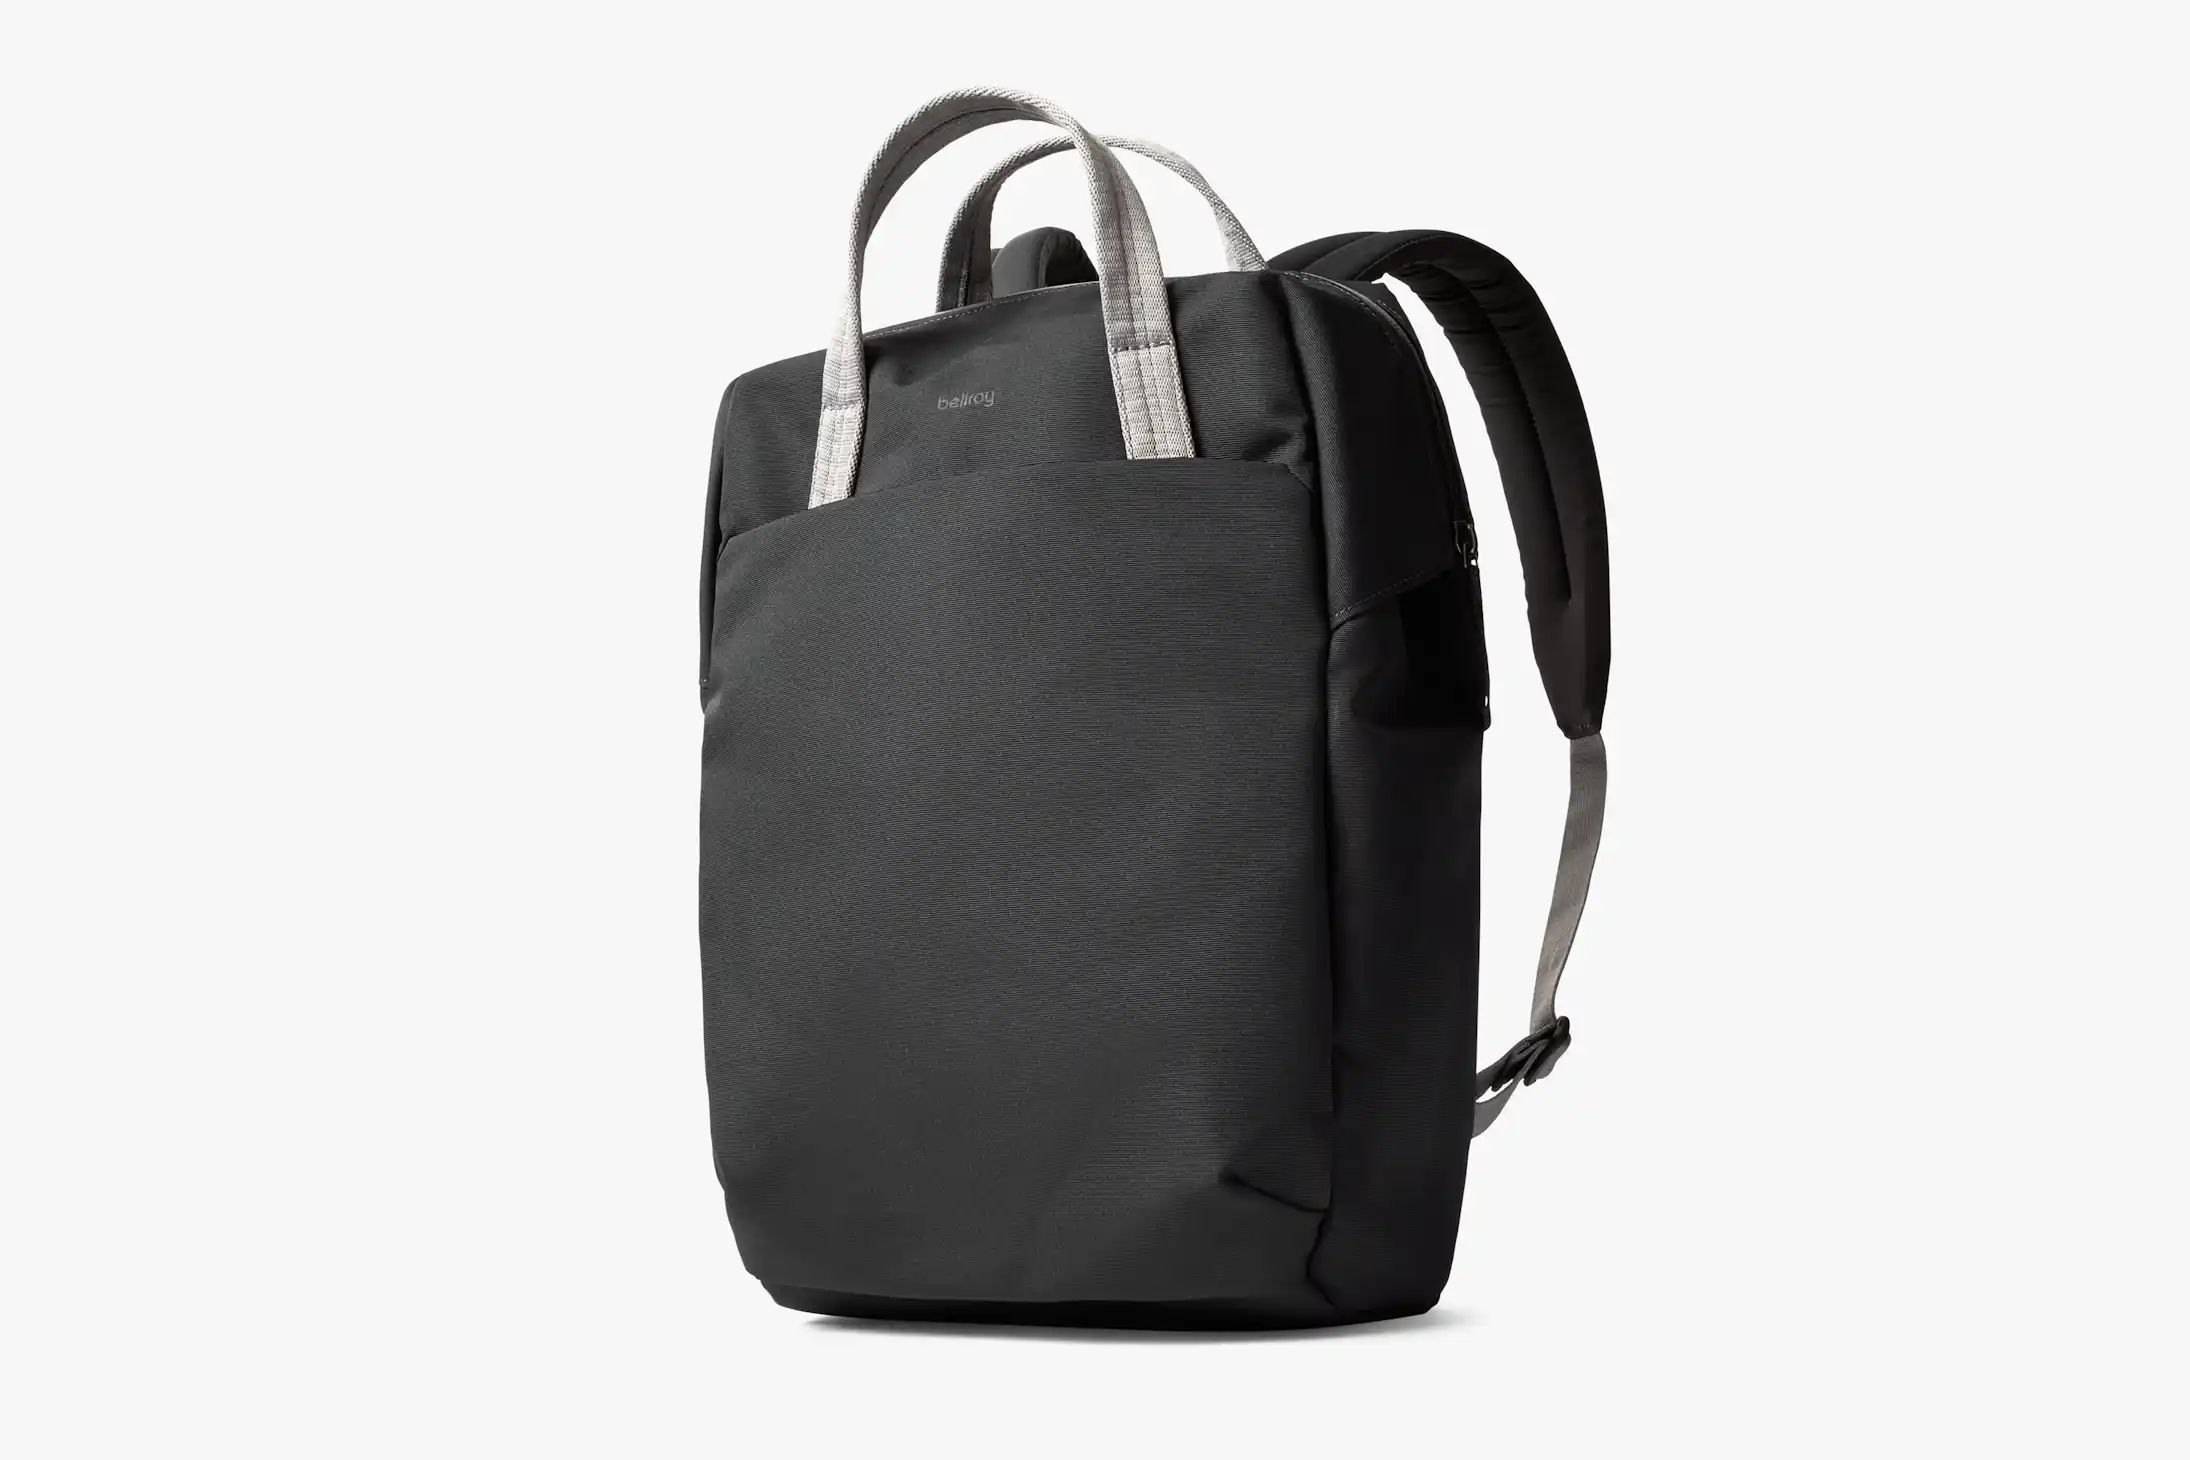 Via Workpack | Tote and Backpack for Work and Travel | Bellroy | Bellroy